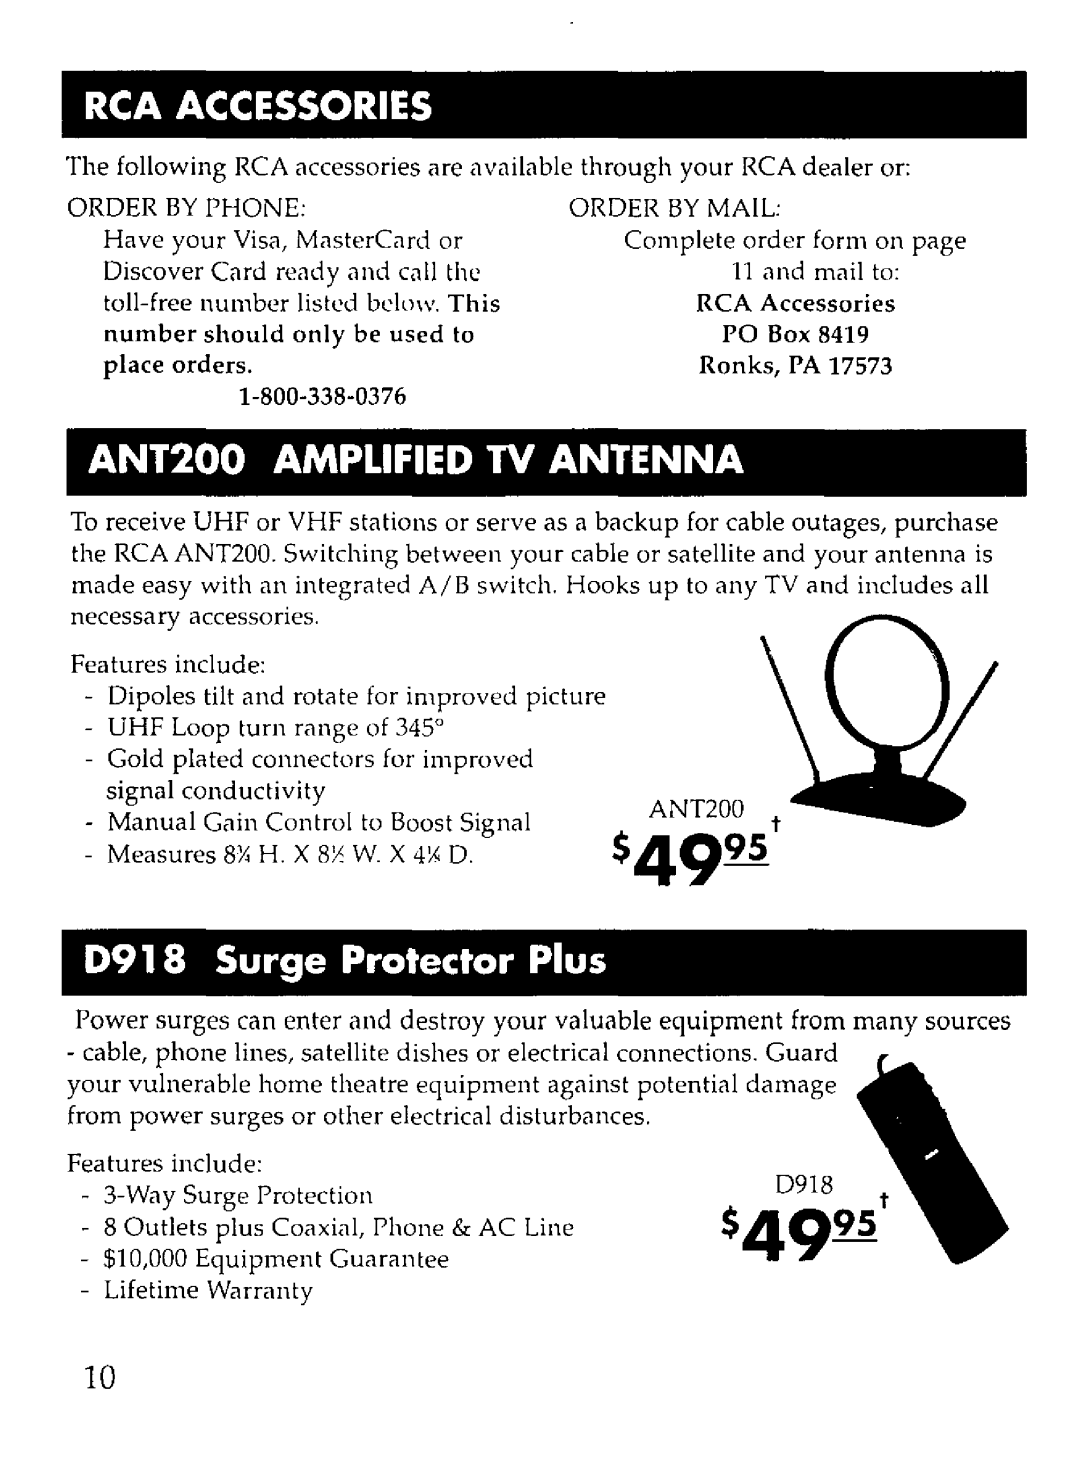 RCA WHP150 manual $4995, Rca Accessories, ANT200 AMPLIFIED TV ANTENNA, D918 Surge Protector Plus 